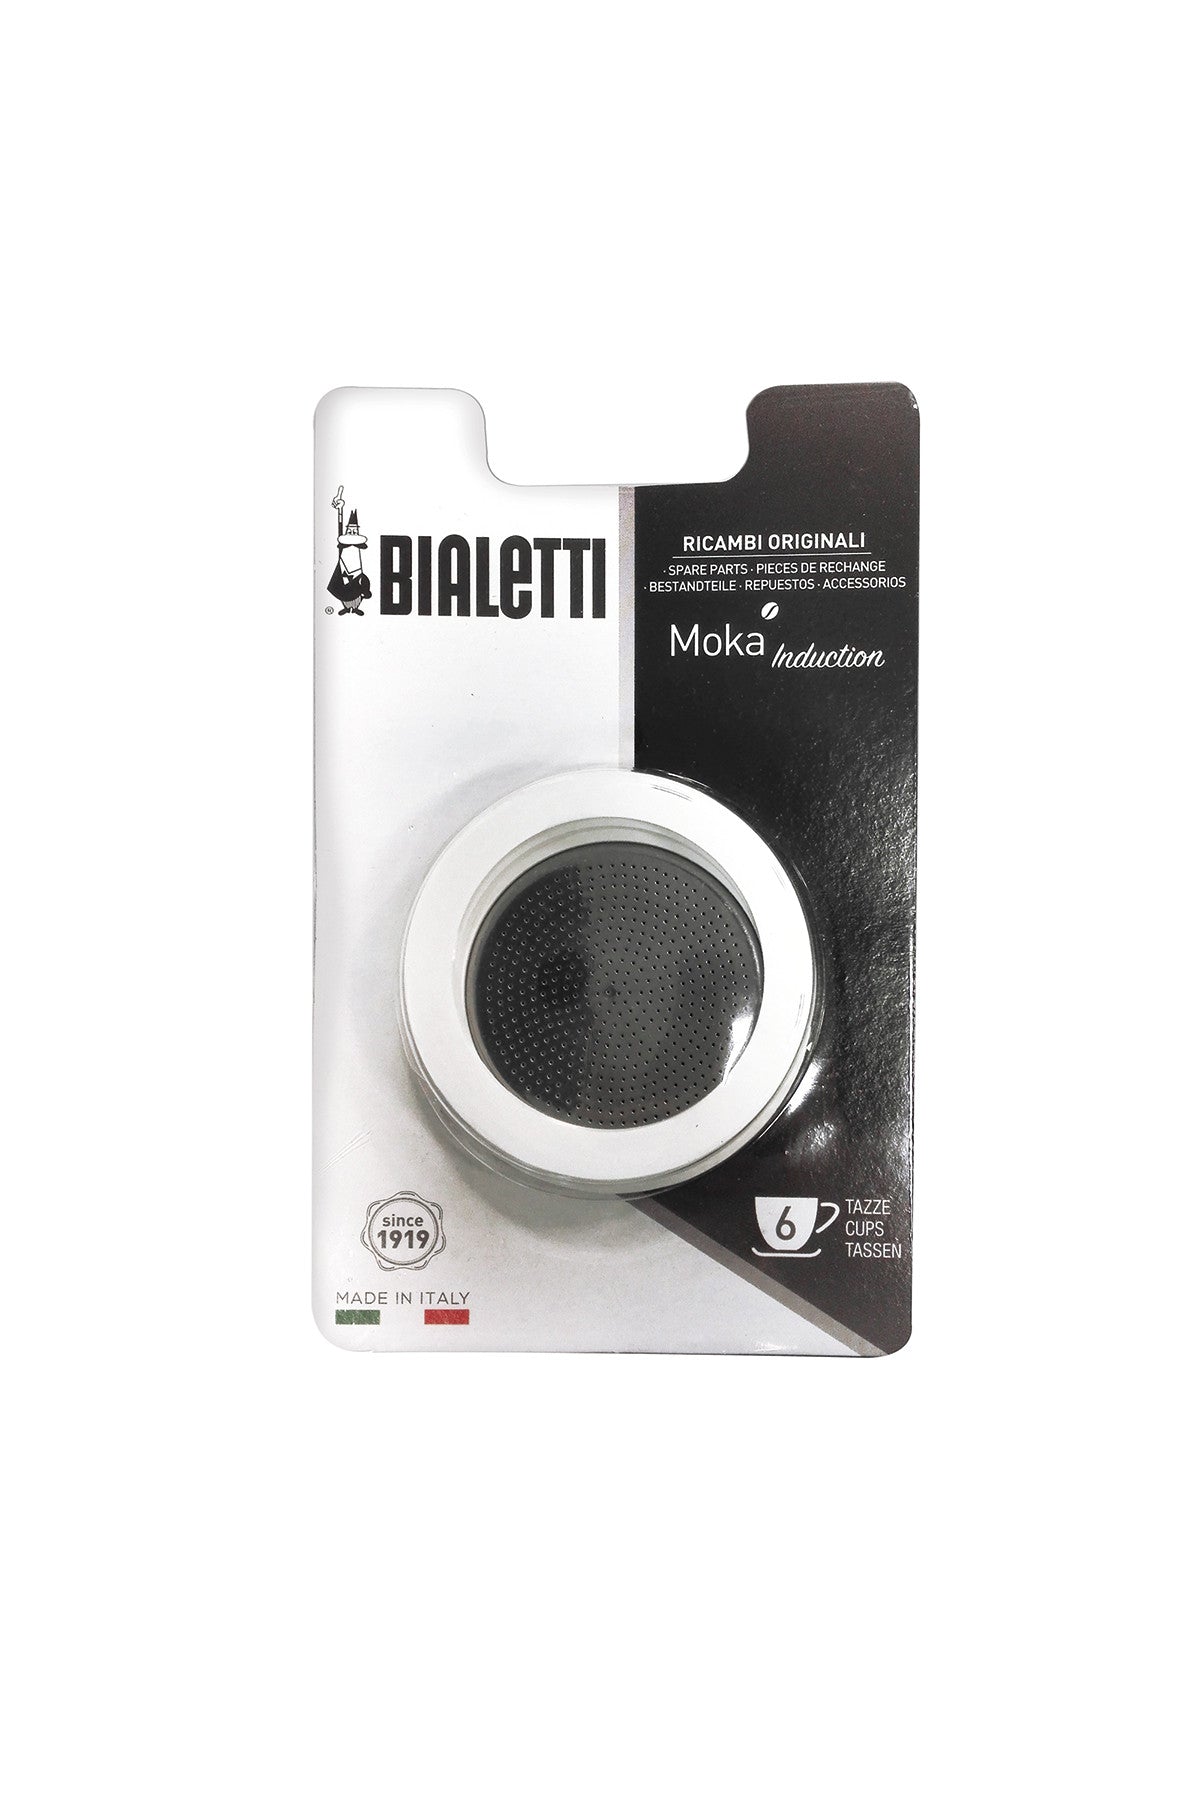 
3 GASKETS & 1 FILTER BIALETTI MOKA INDUCTION 6 CUPS